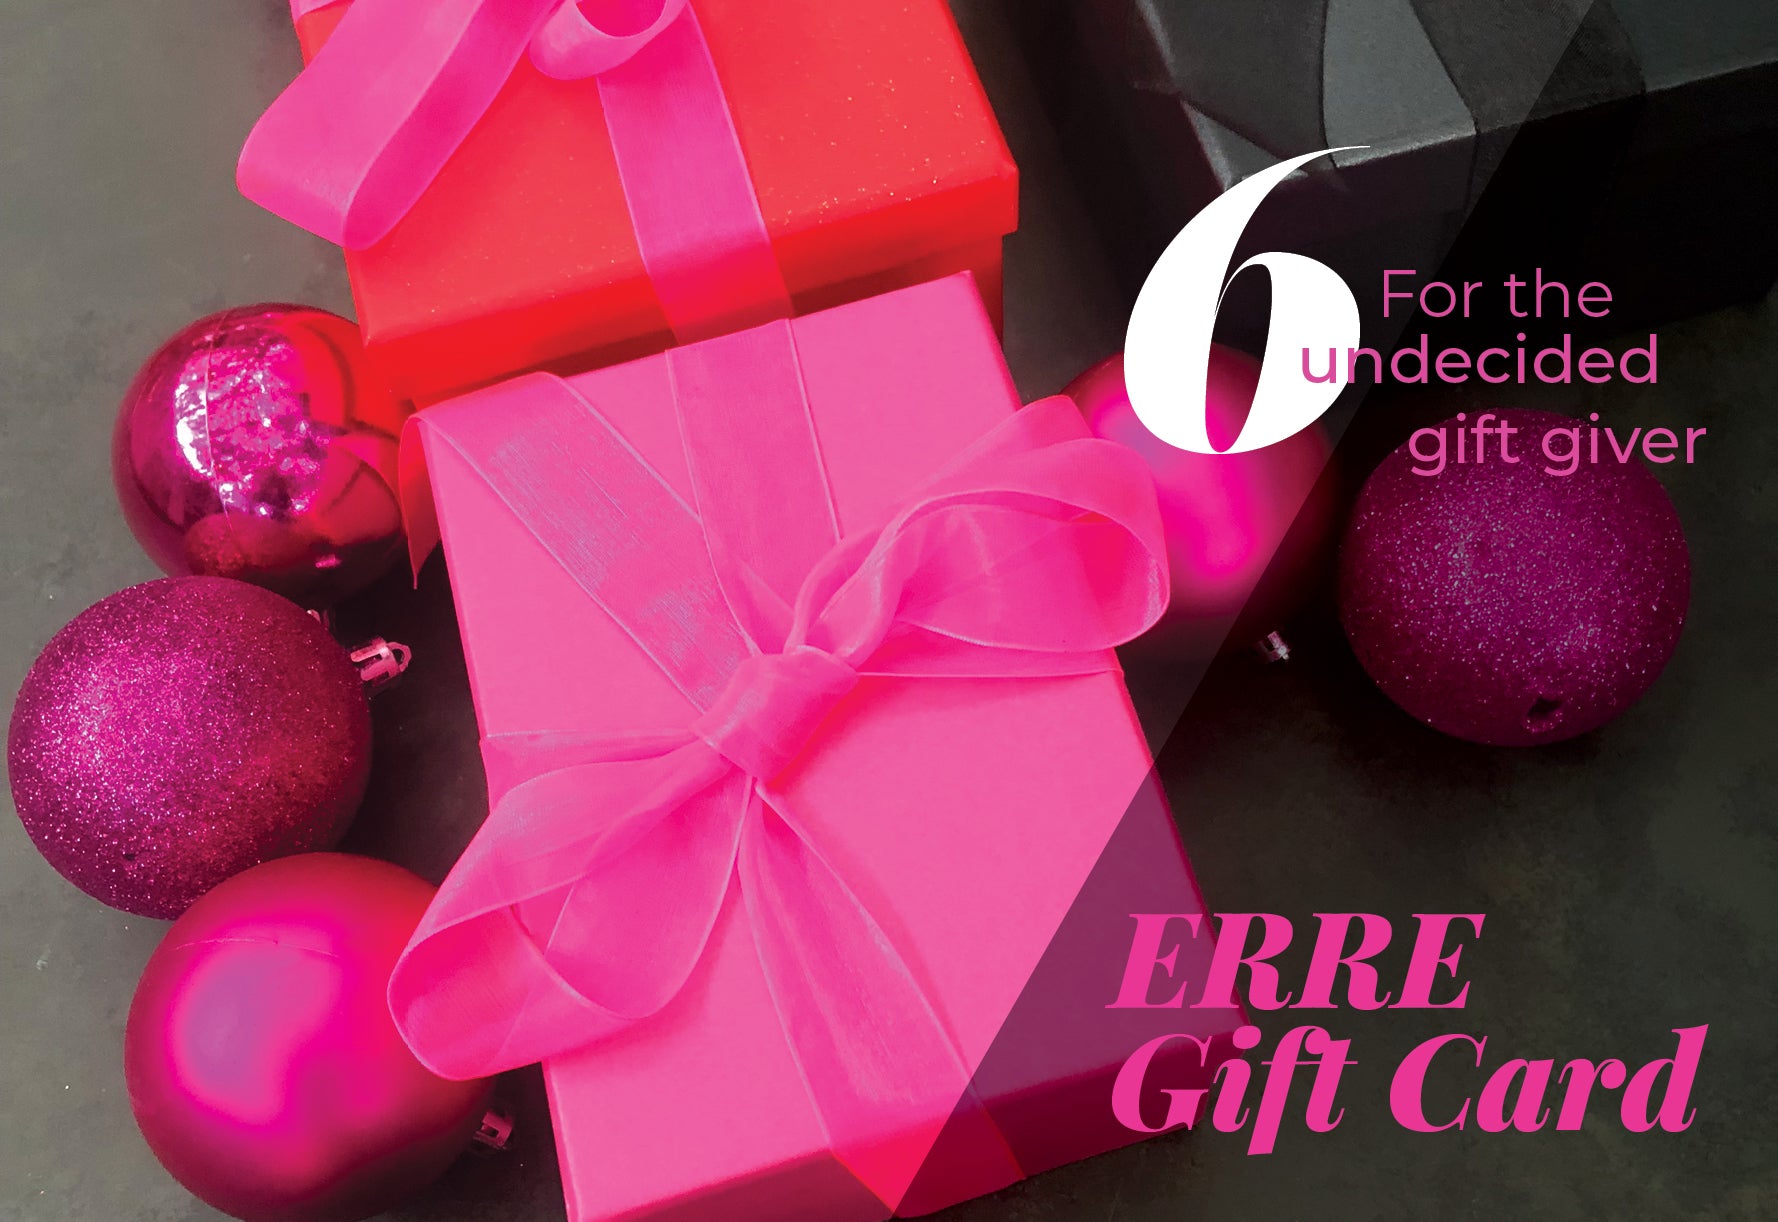 ERRE Gift Cards